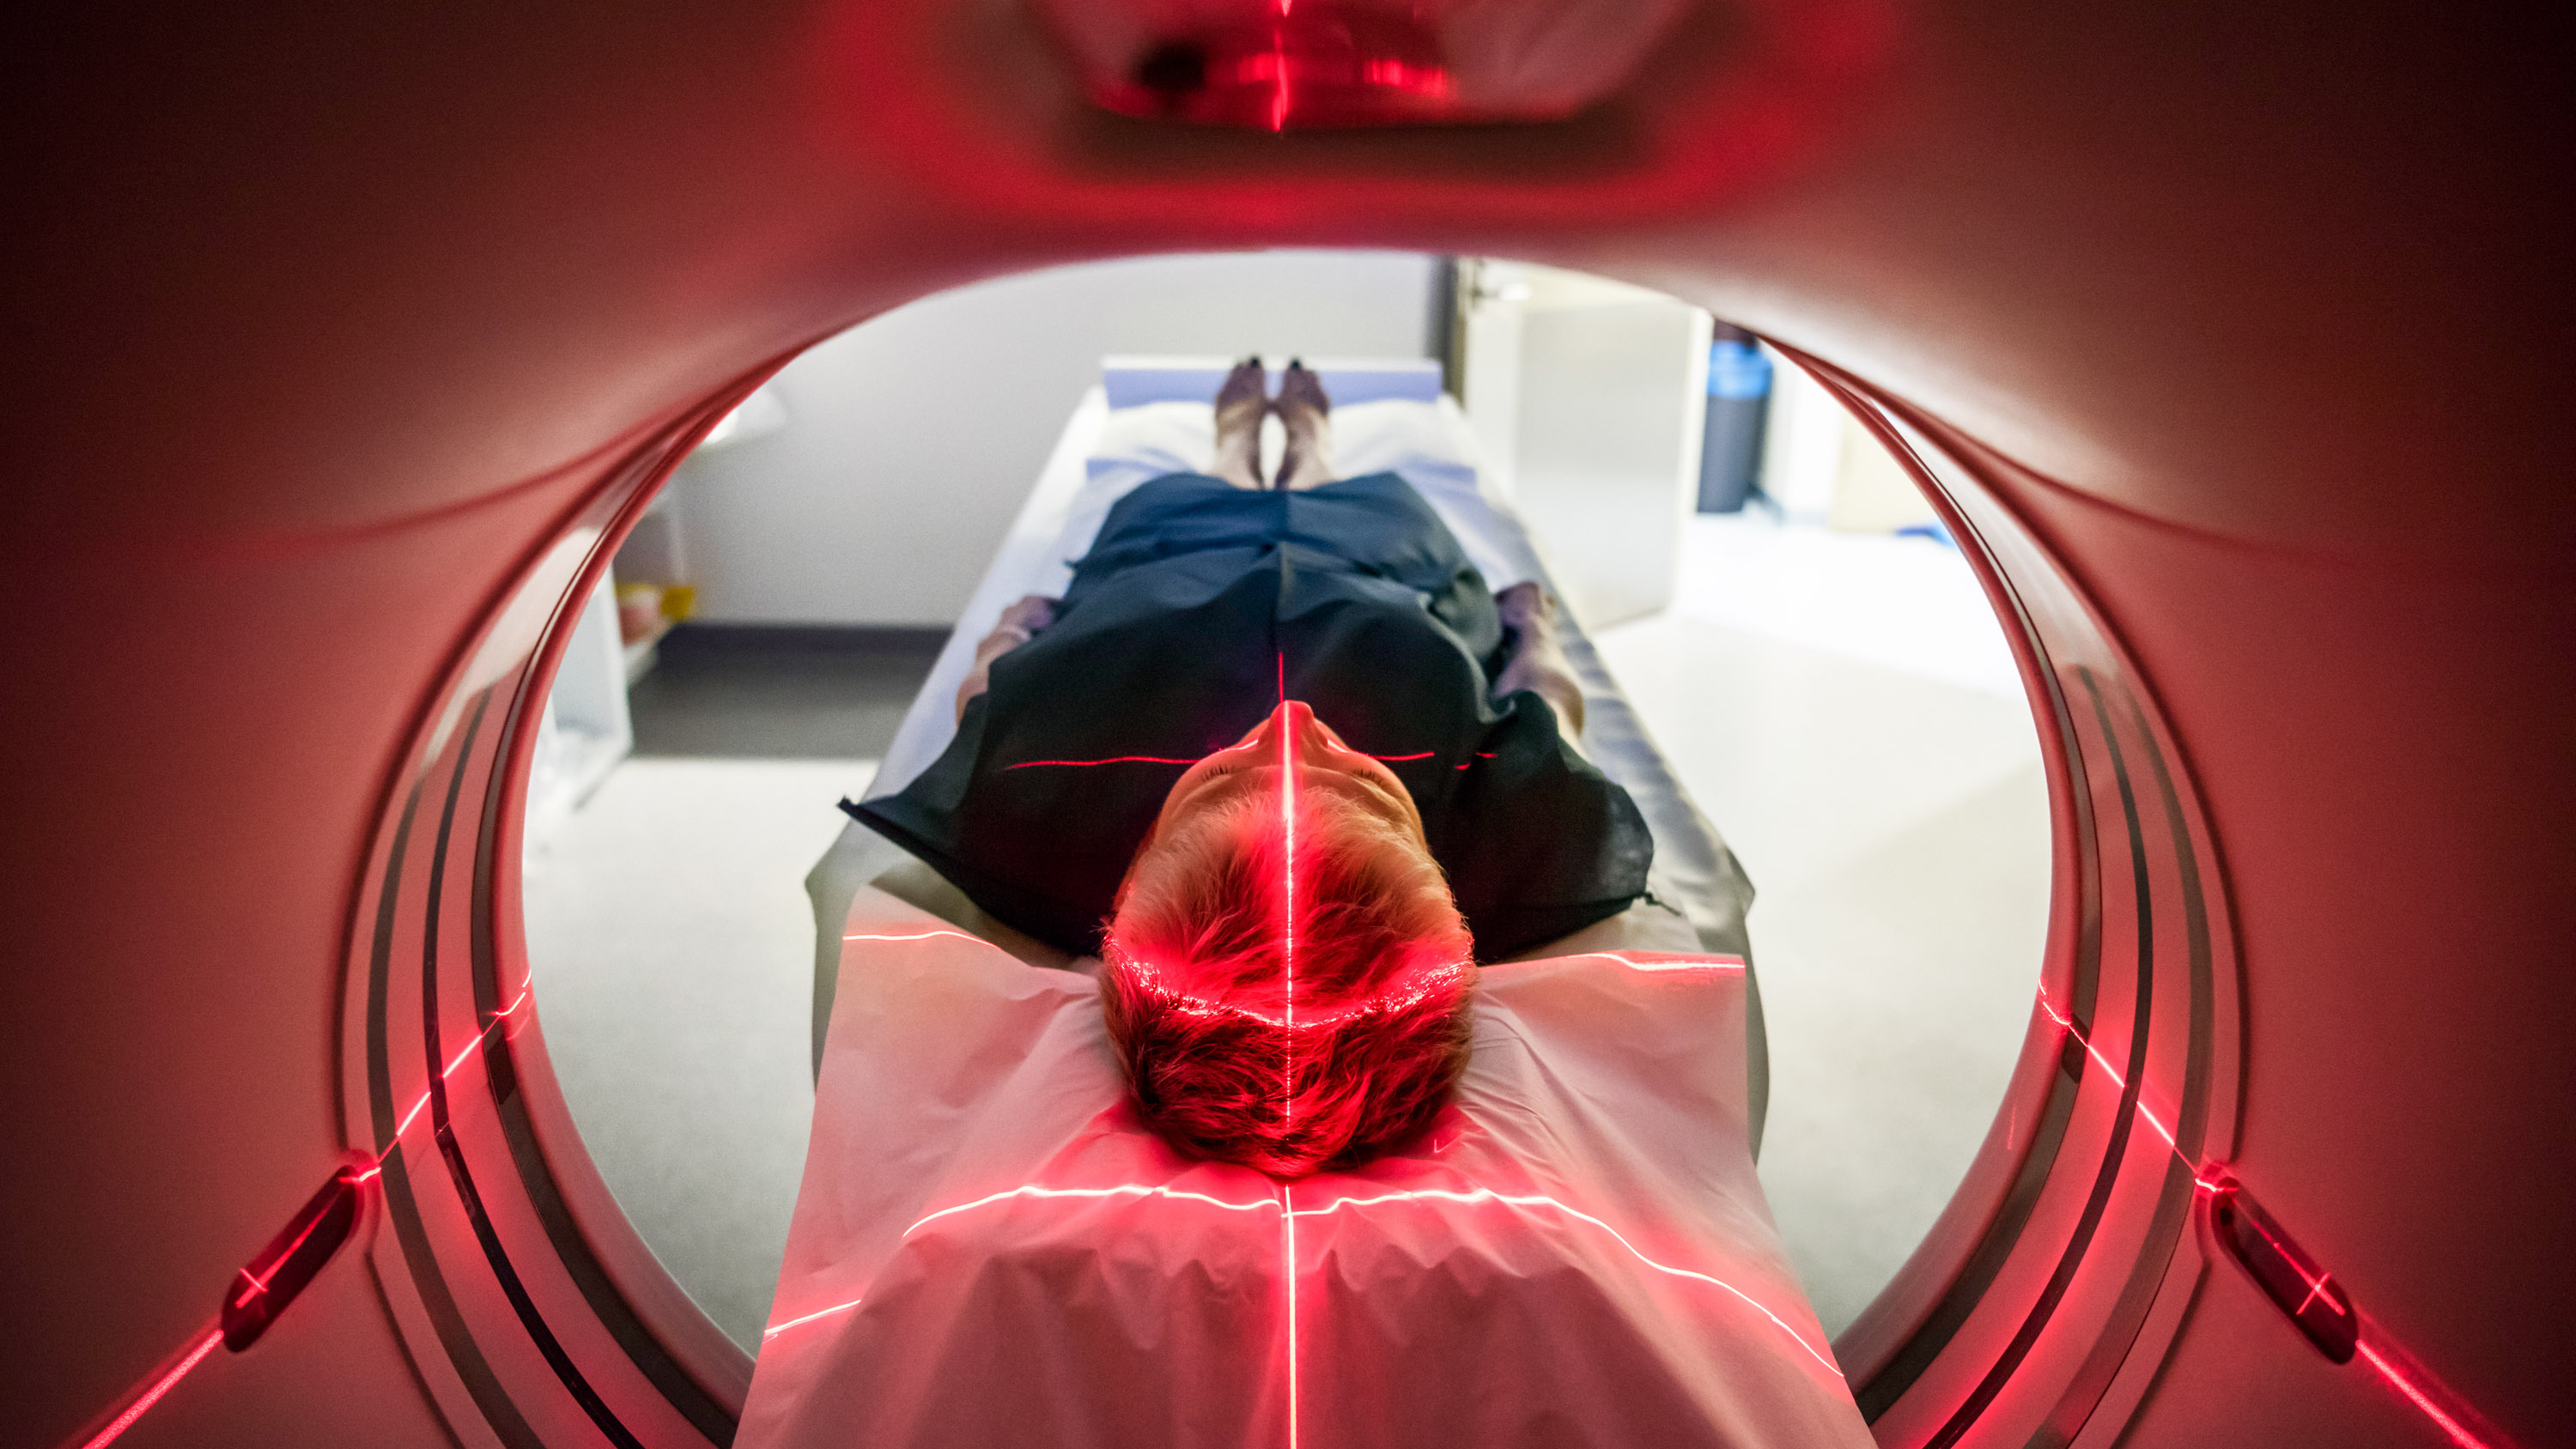 Person undergoing a scan in hospital.